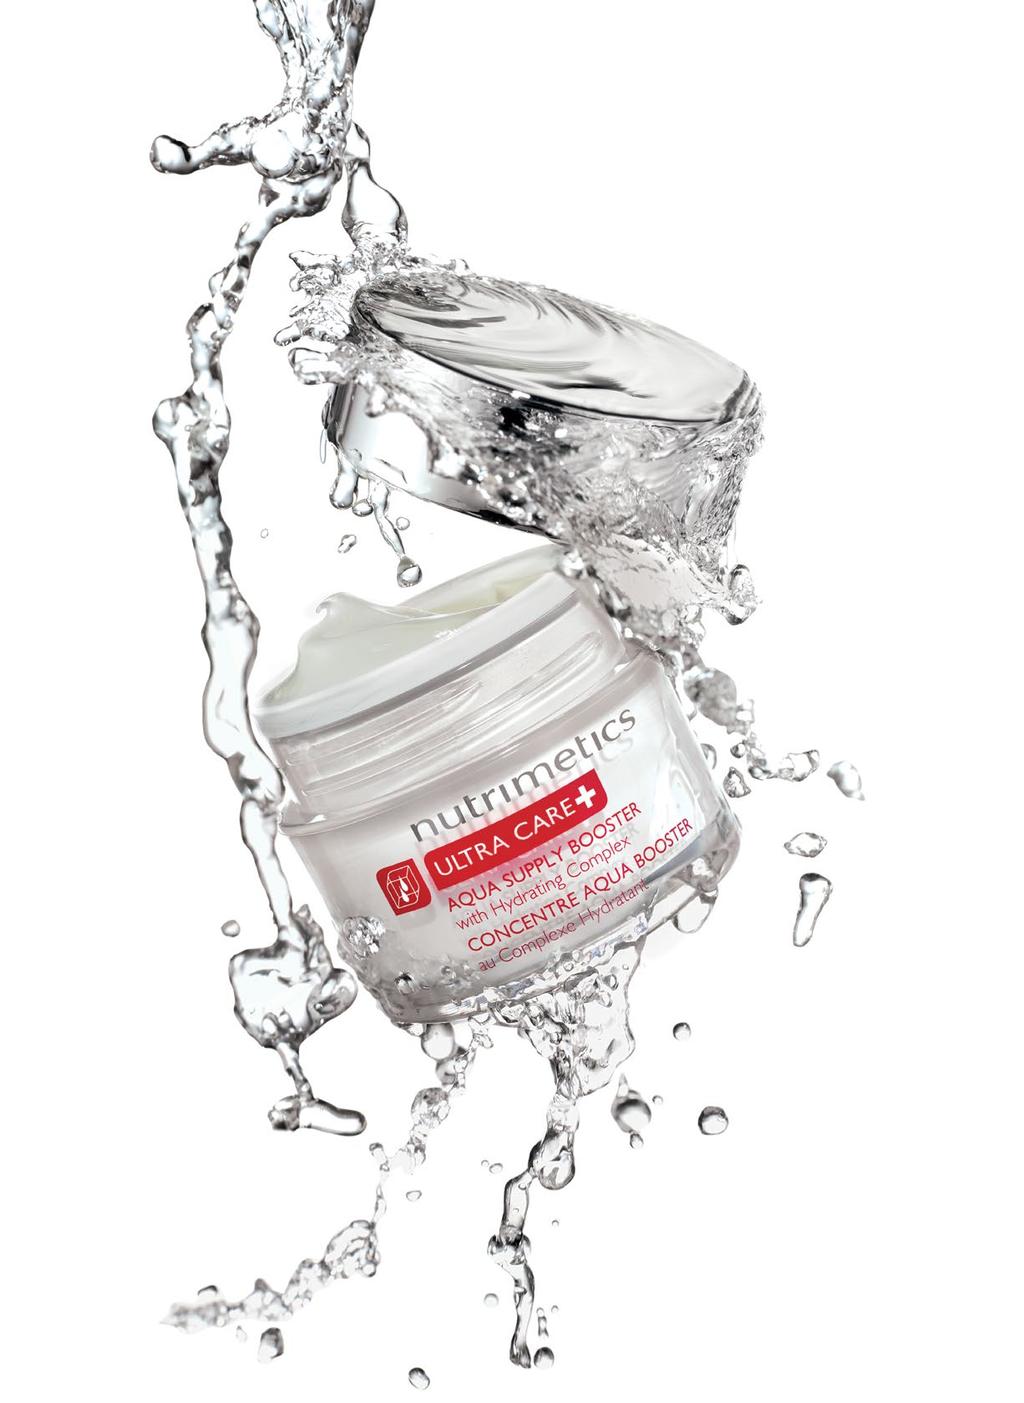 Your Moisture Booster Best for overnight hydration Upgrade your routine This non-greasy gel plumps skin up with Amino Acids to combat visible skin ageing and water loss overnight.